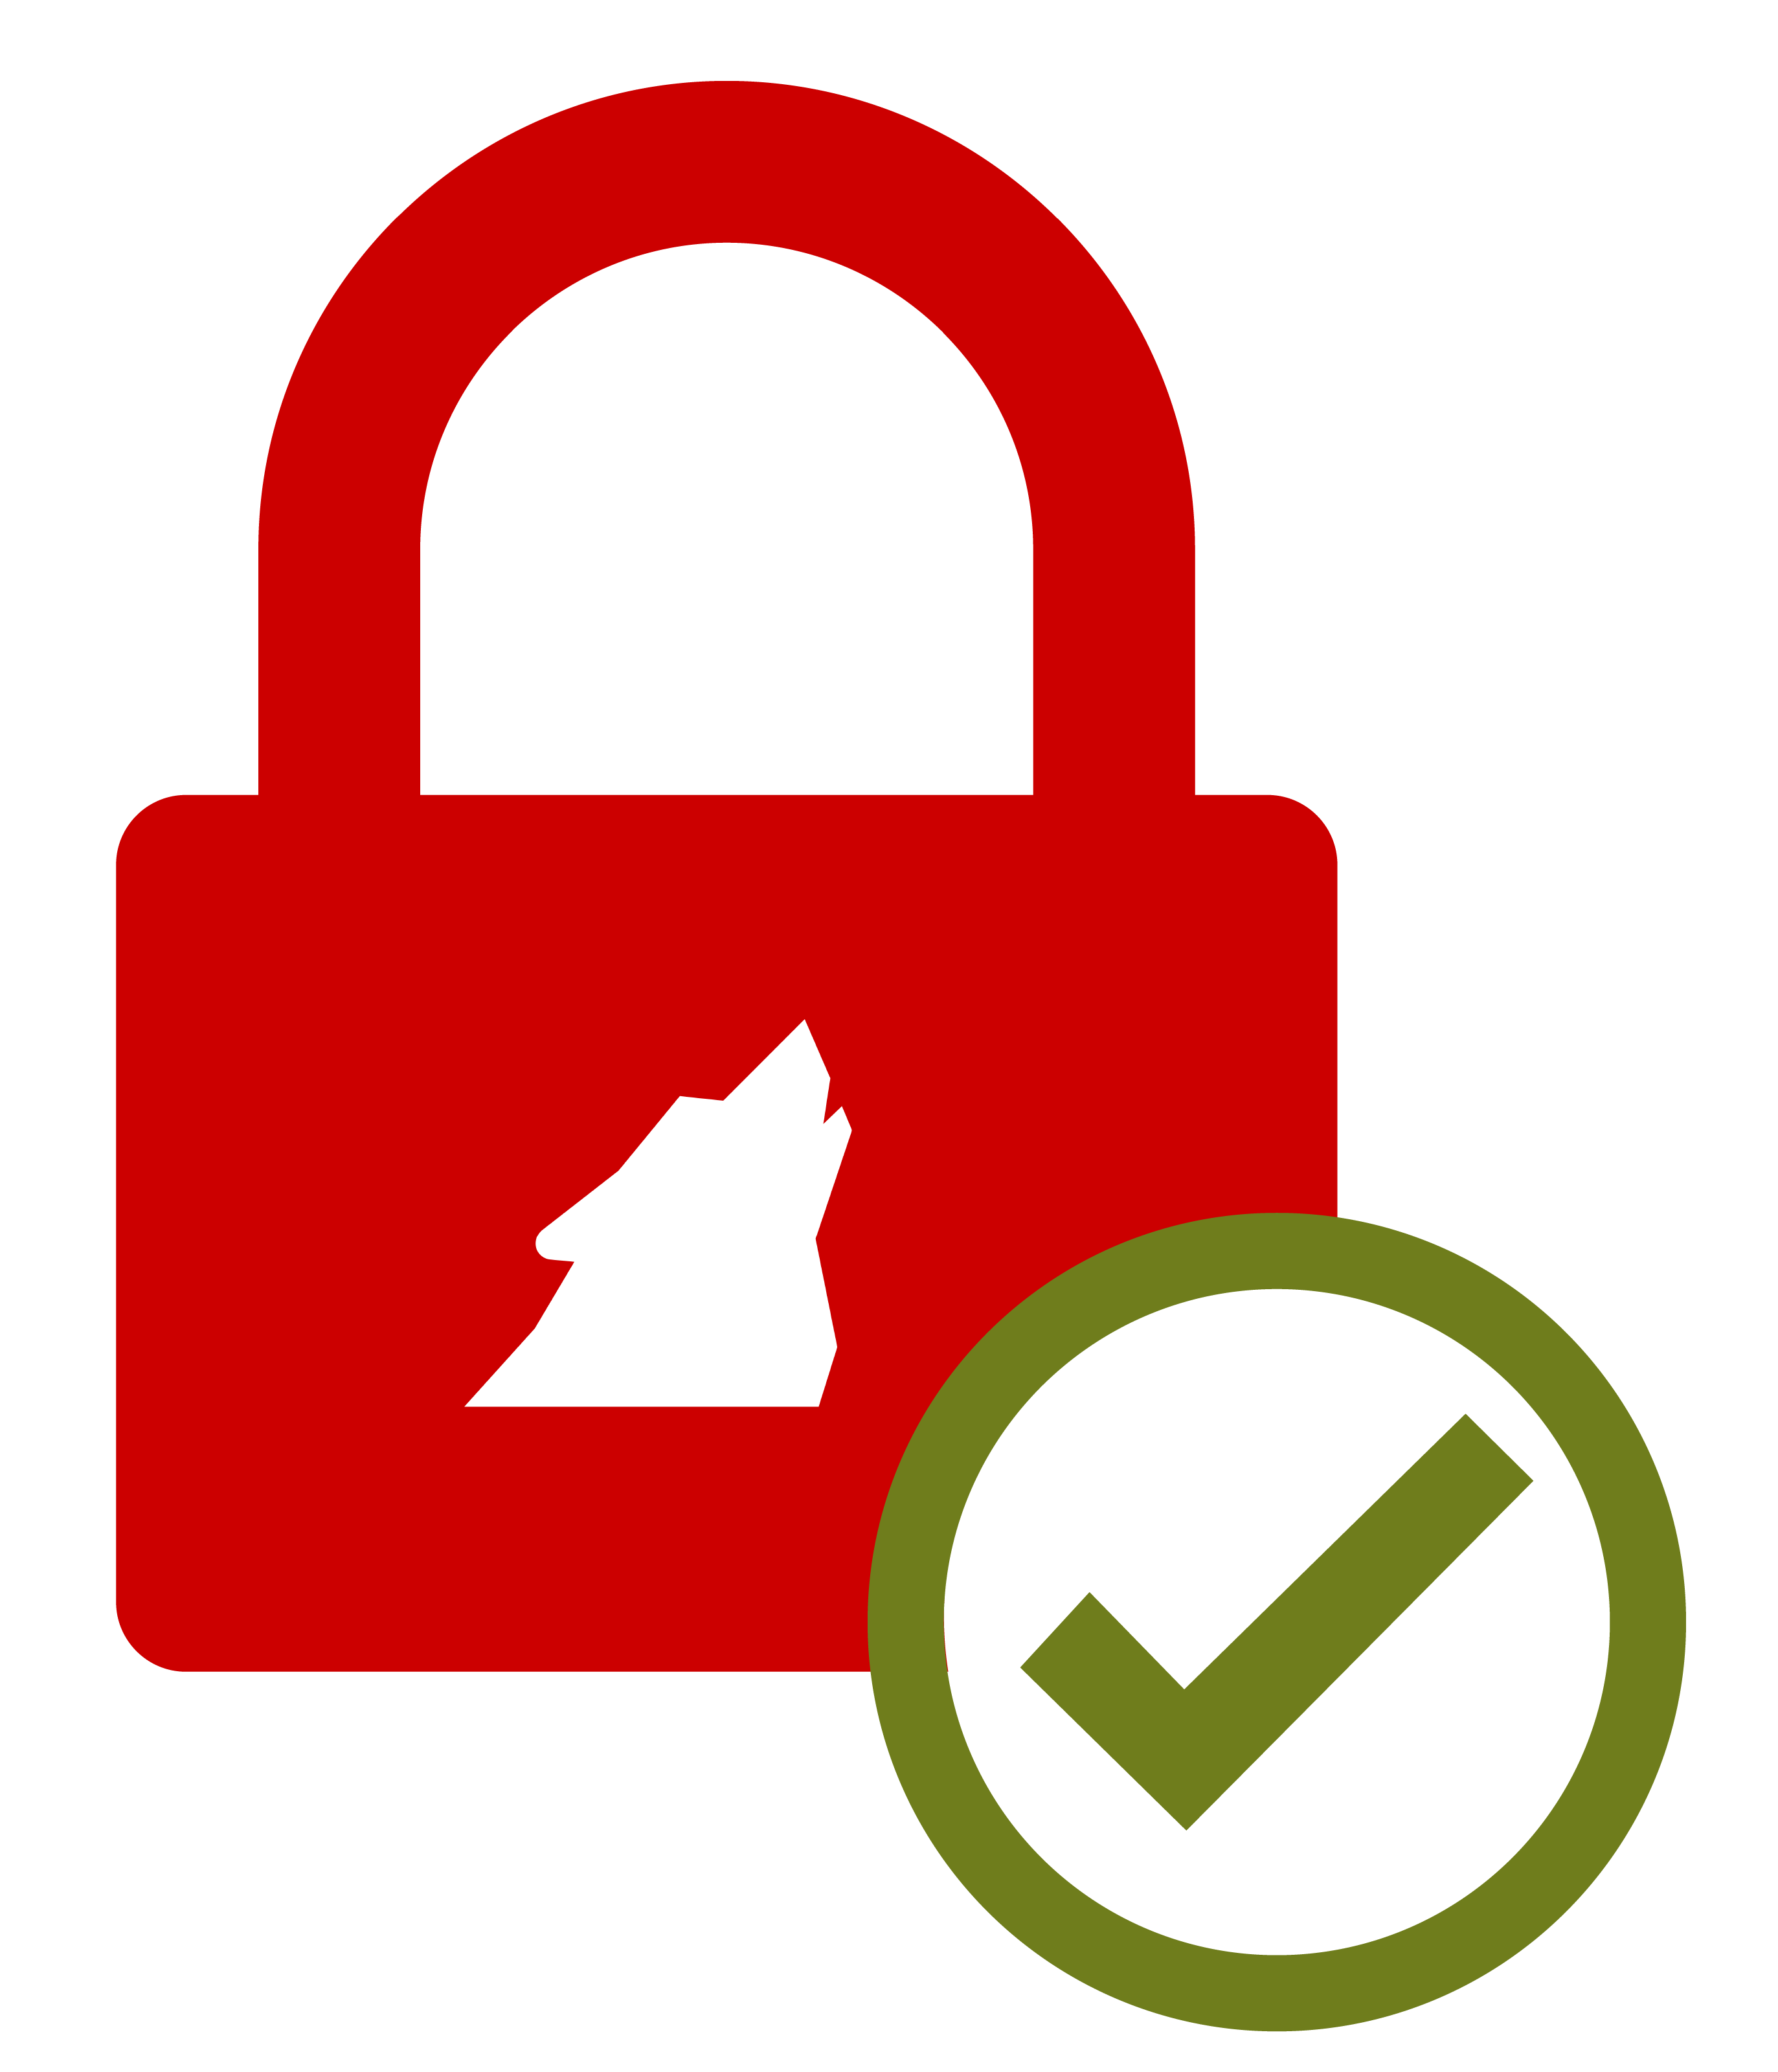 DPW-graphic-2023 red lock with green check mark inside white circle